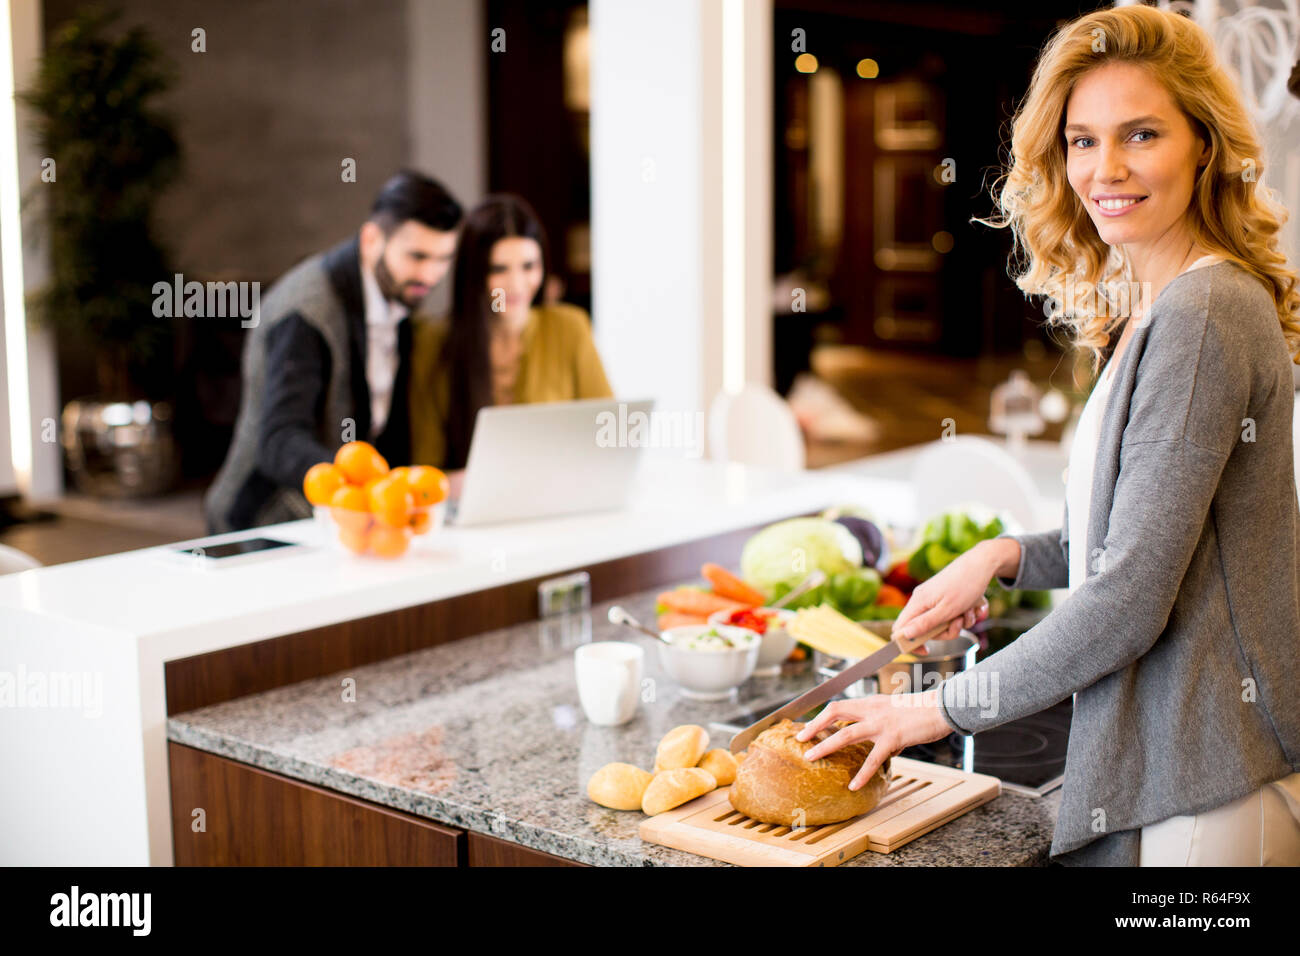 Cheerful young woman preparing food while couple in background using laptop Stock Photo